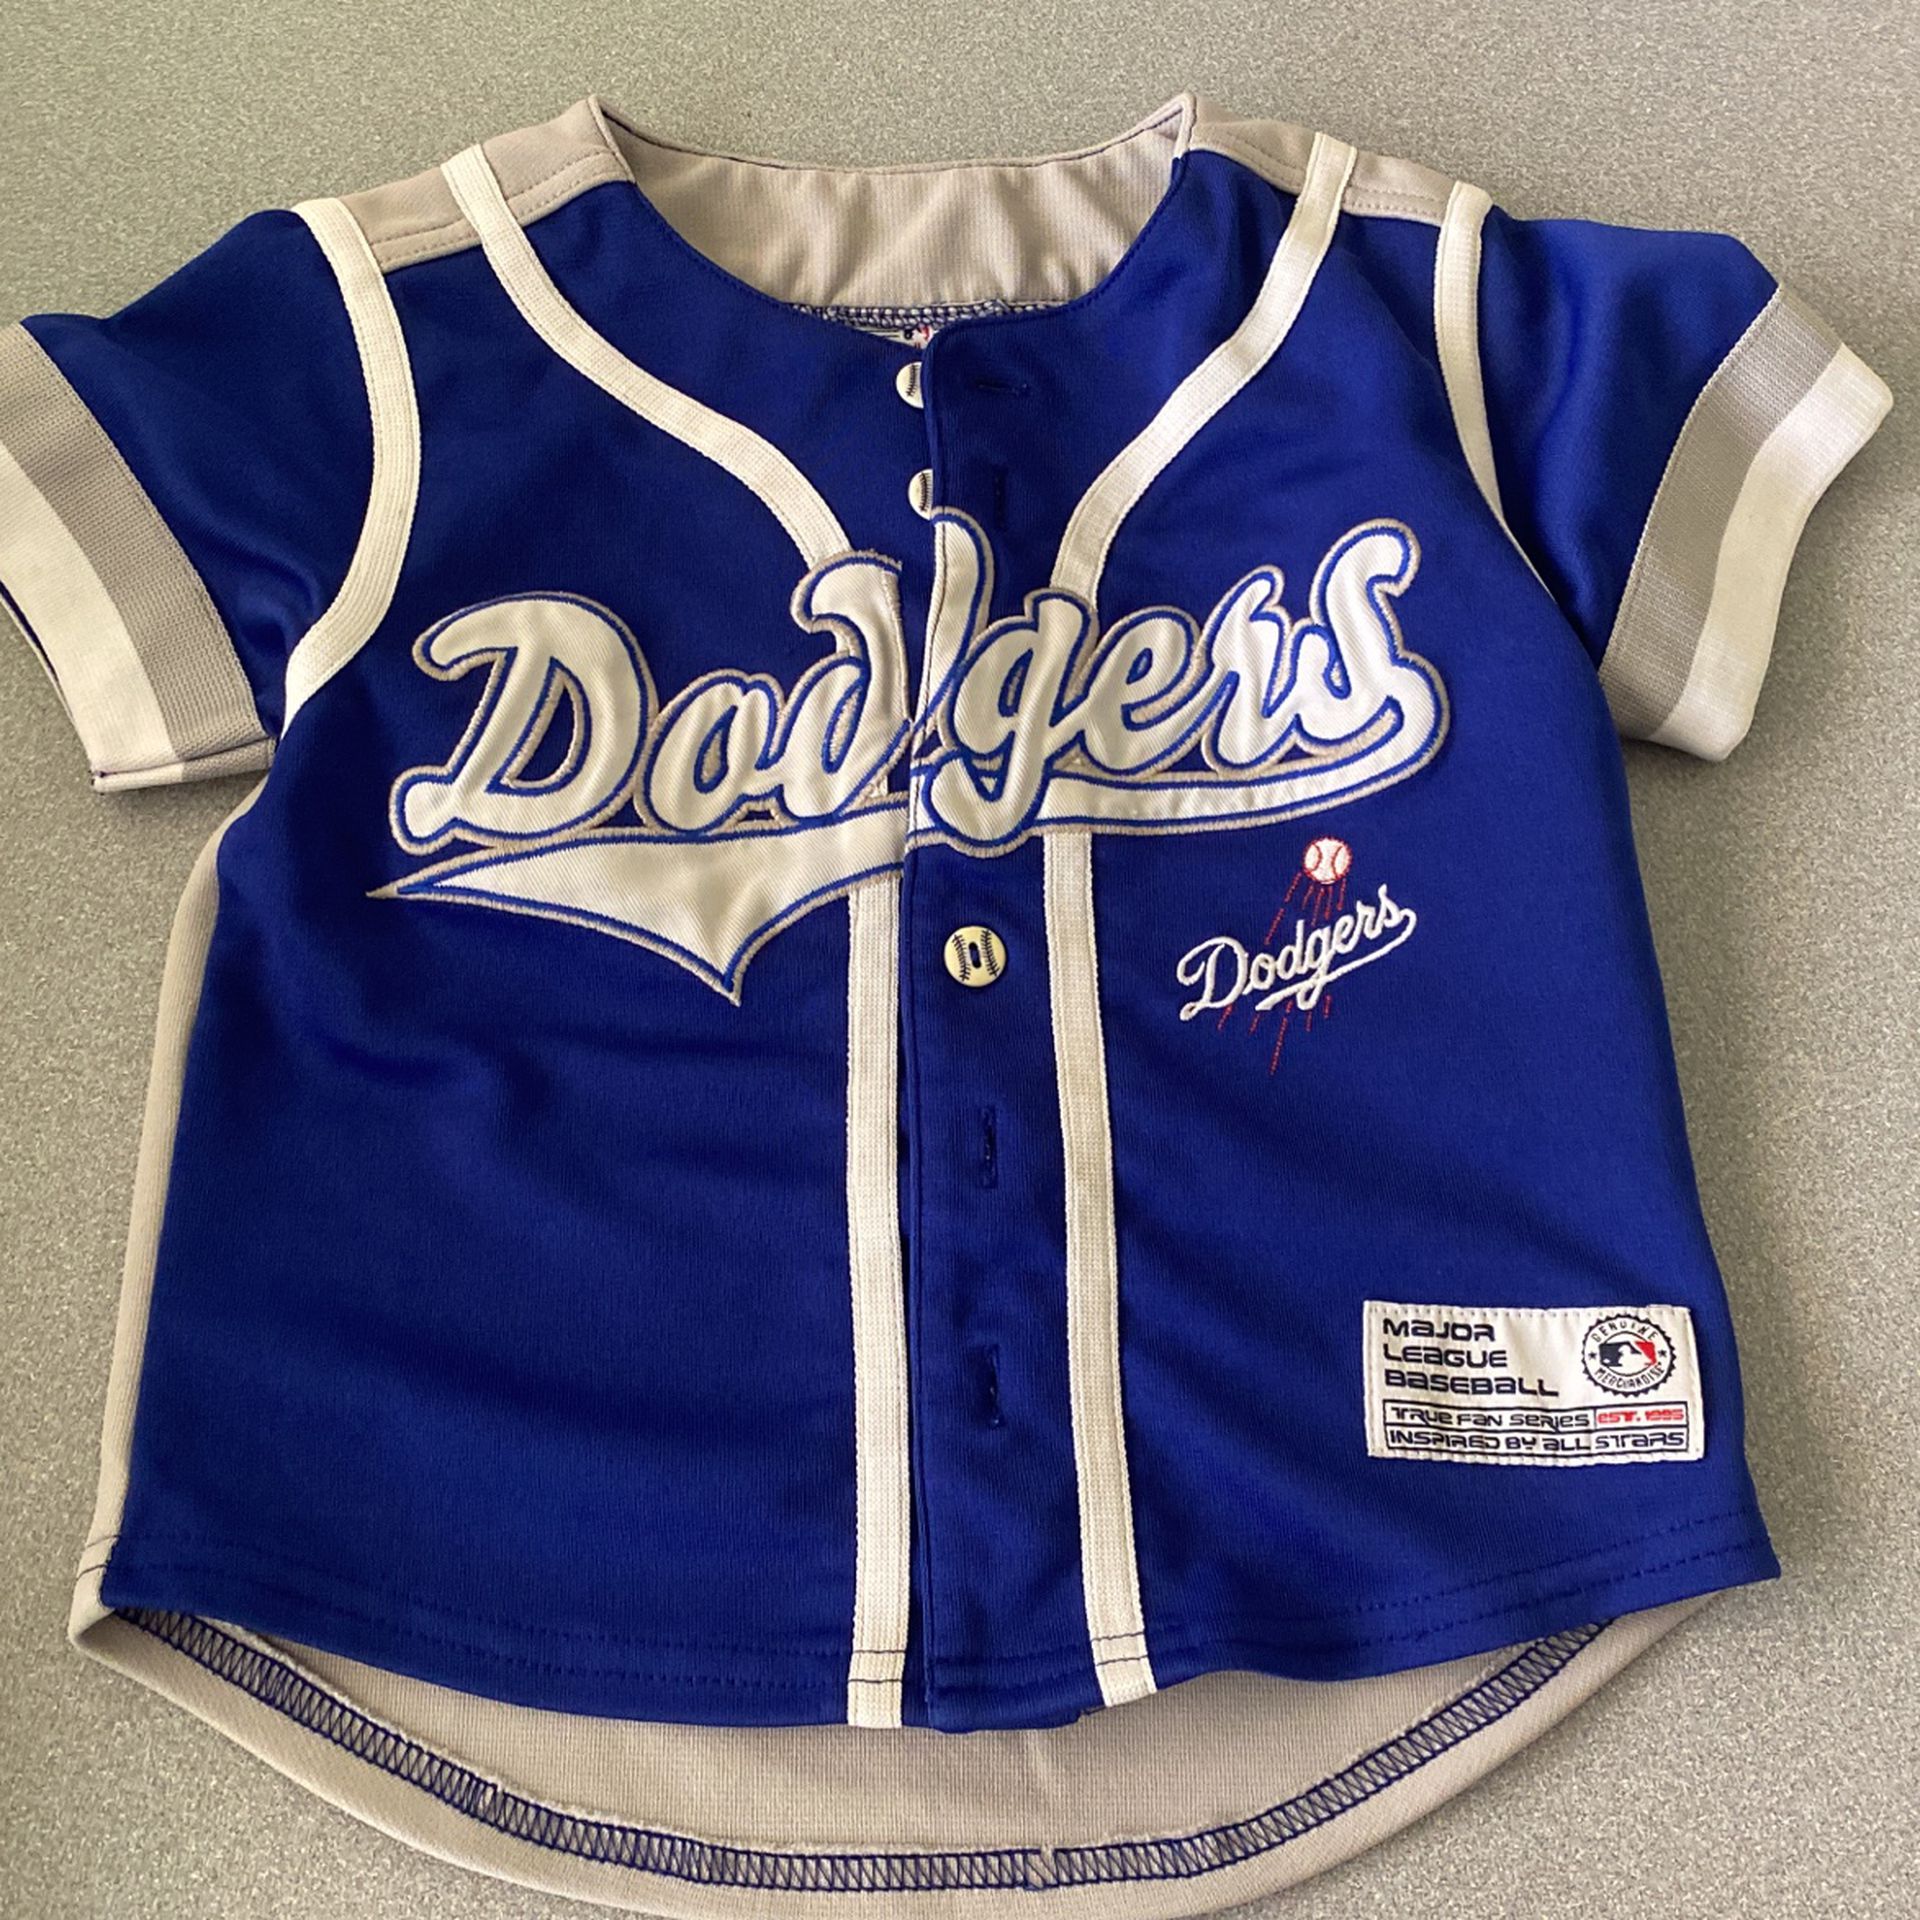 Los Angeles Dodgers INFANT jersey for Sale in San Diego, CA - OfferUp